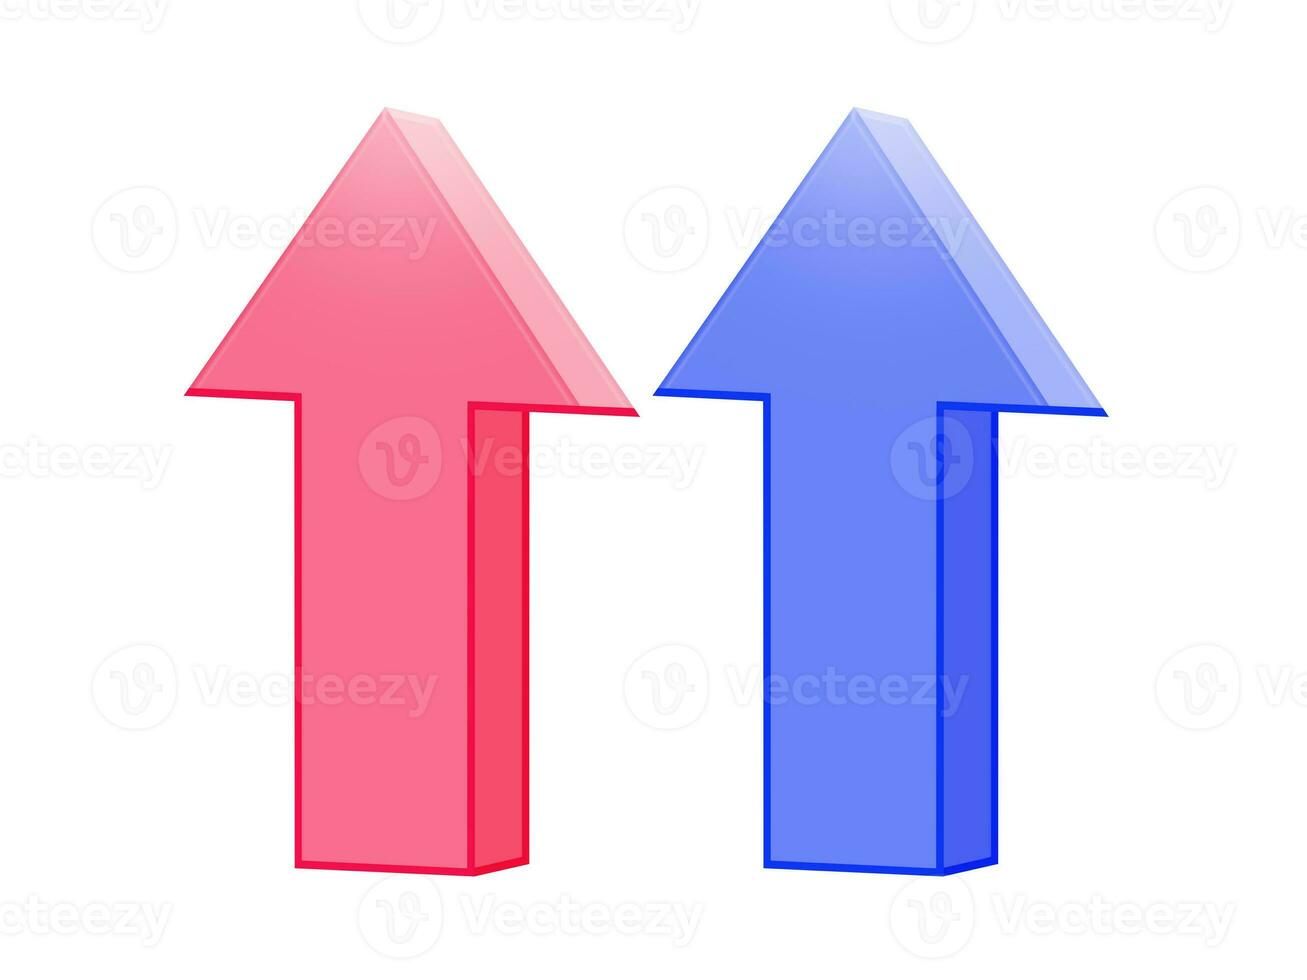 The digital blue arrow pointing up shows the feeling of increase, growth, motivation, hope, and more positive meaning. photo